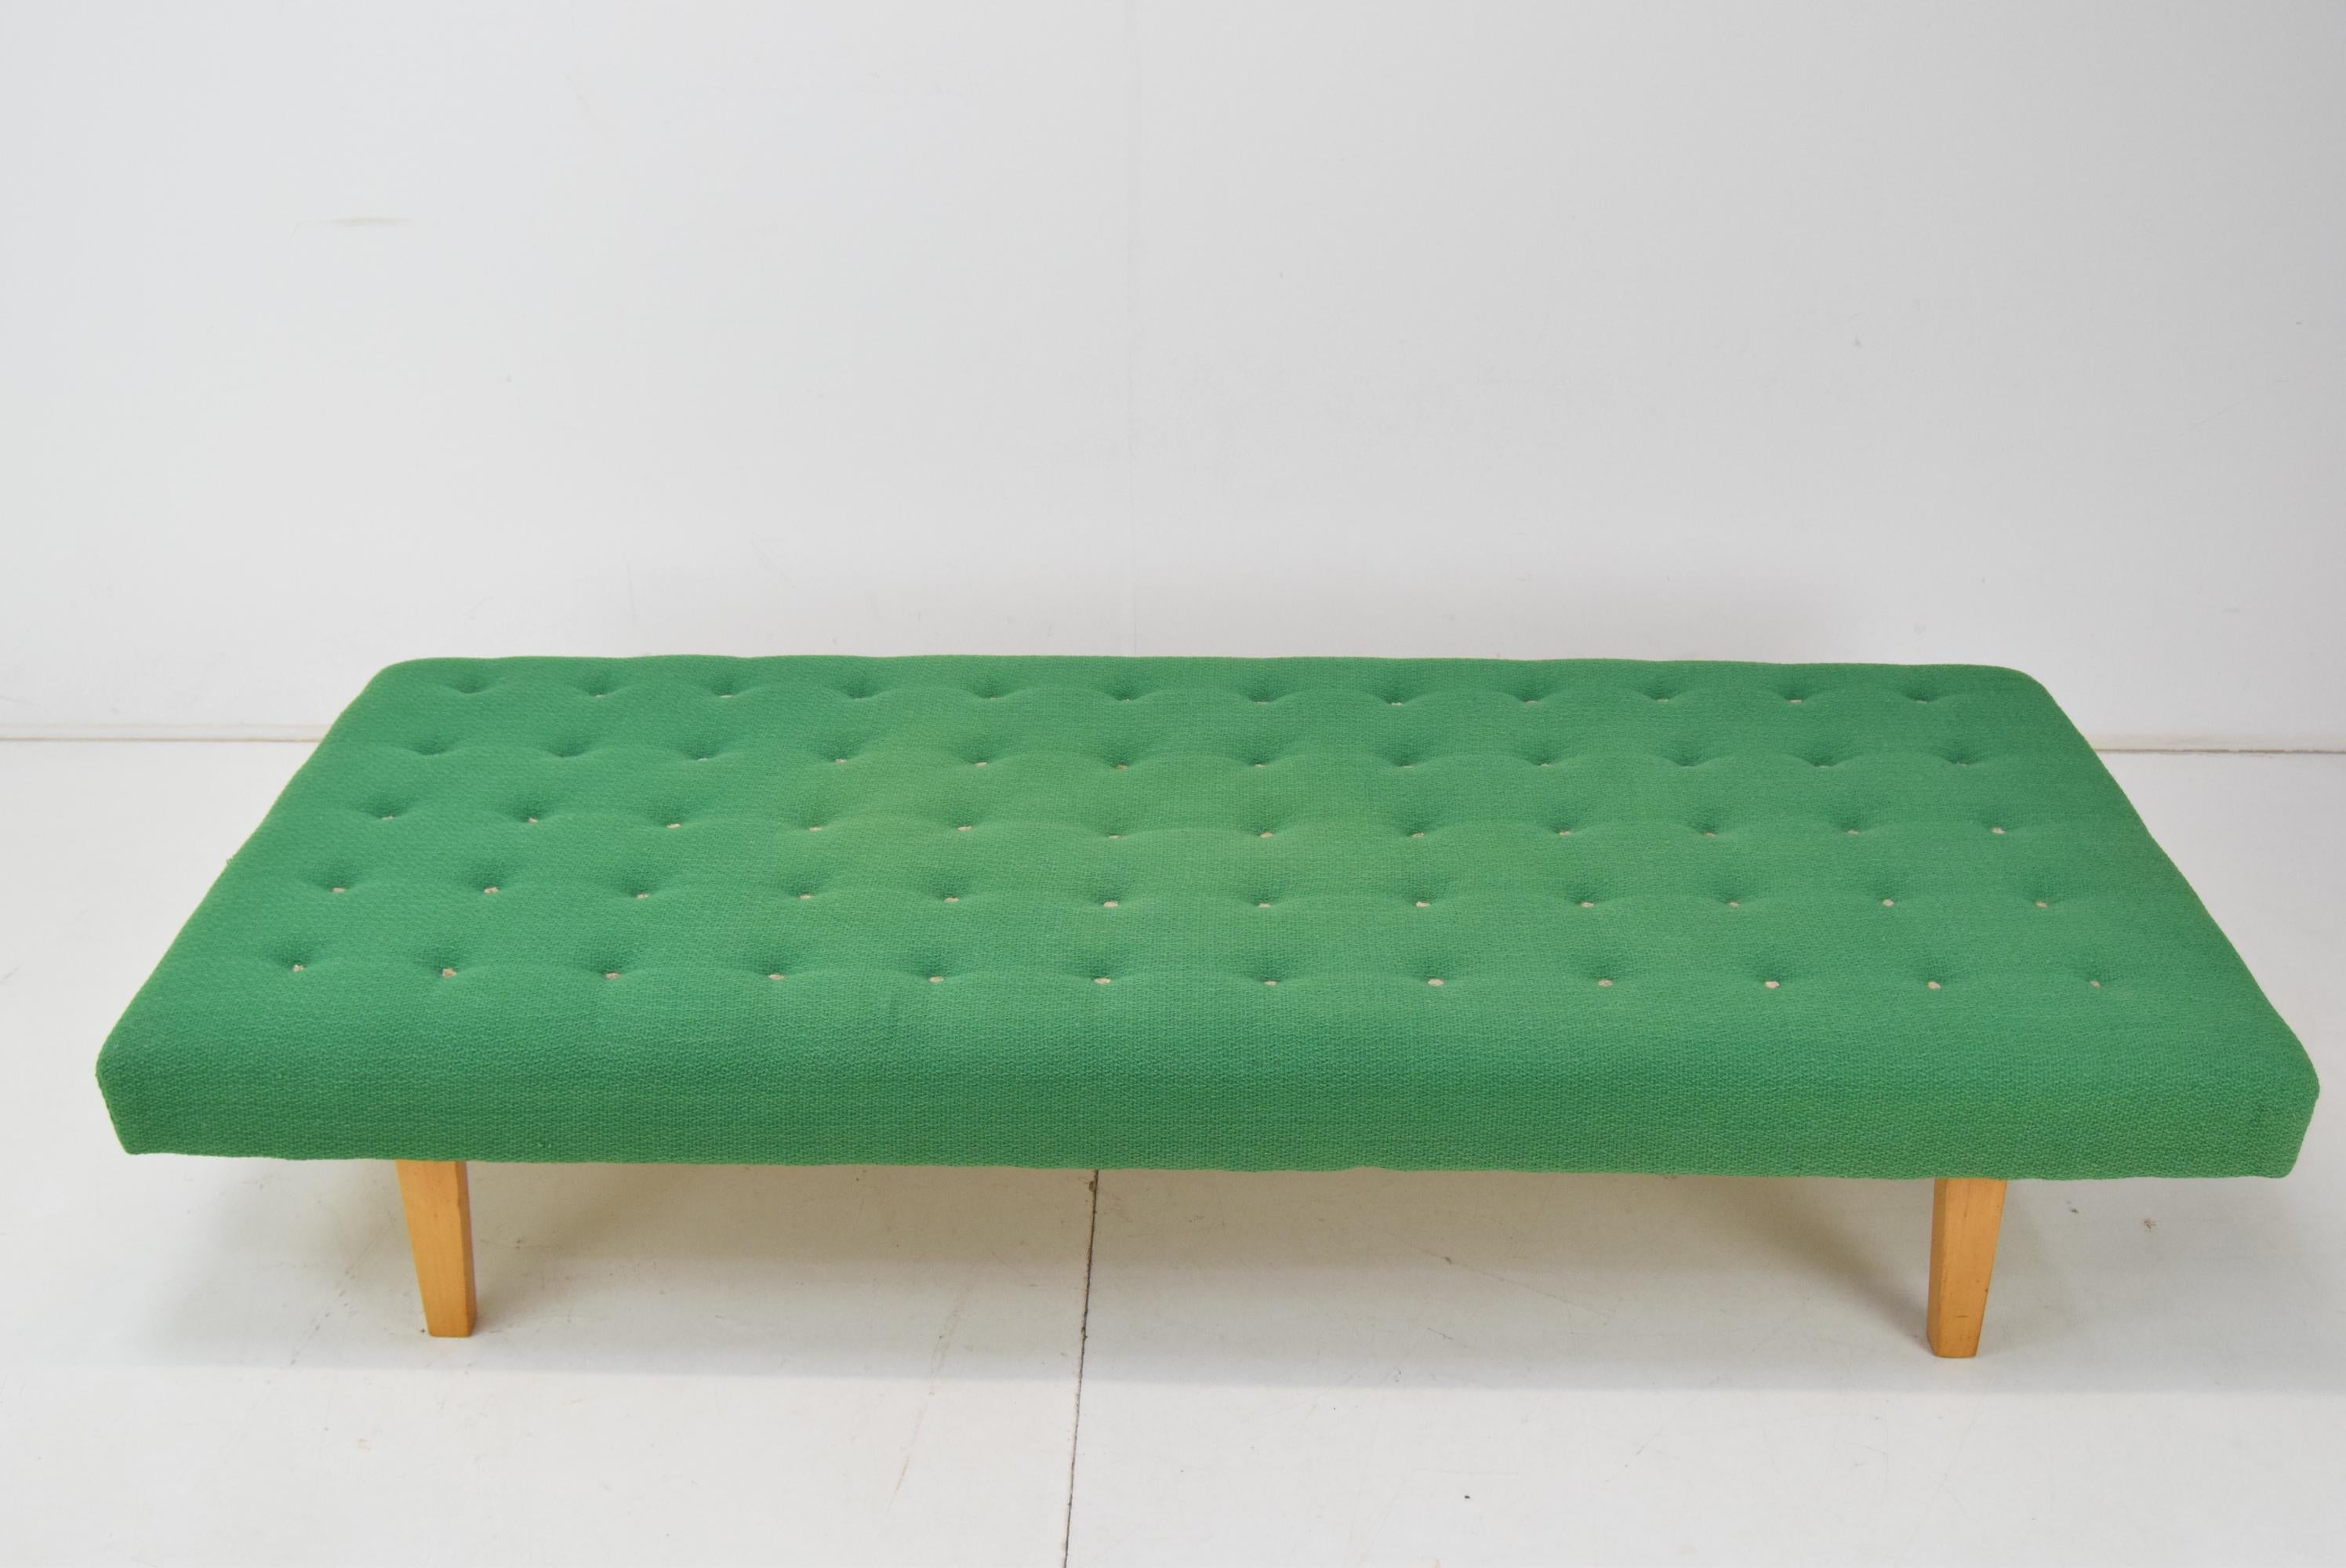 Made in Czechoslovakia
Made of fabric, wood
Original condition.